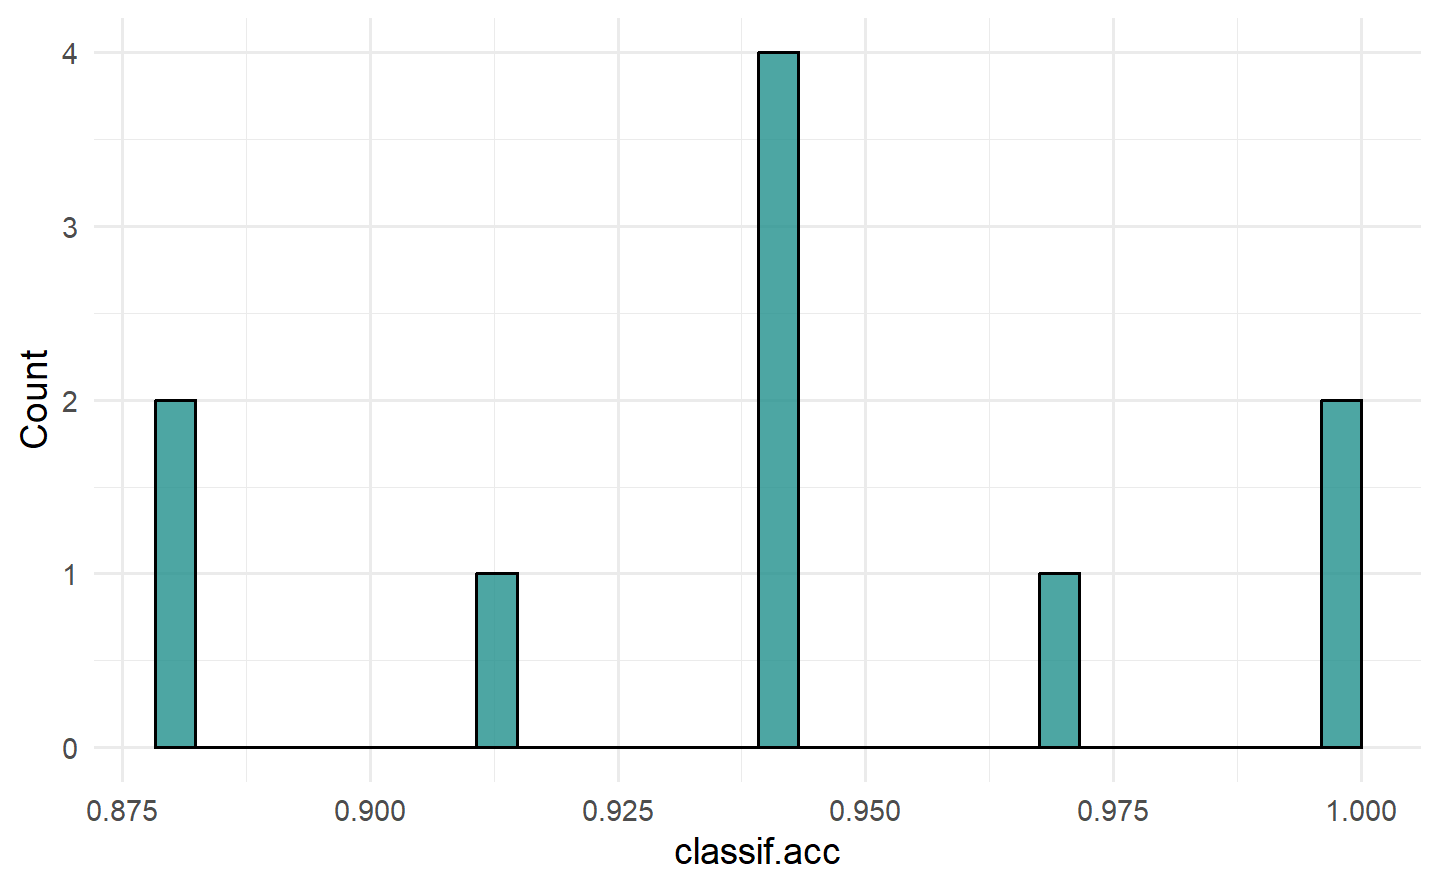 Left: a boxplot ranging from 0.875 to 1.0 and the interquartile range between 0.925 and 0.7. Right: a histogram with five bars in a roughly normal distribution with mean 0.95, minimum 0.875 and maximum 1.0.